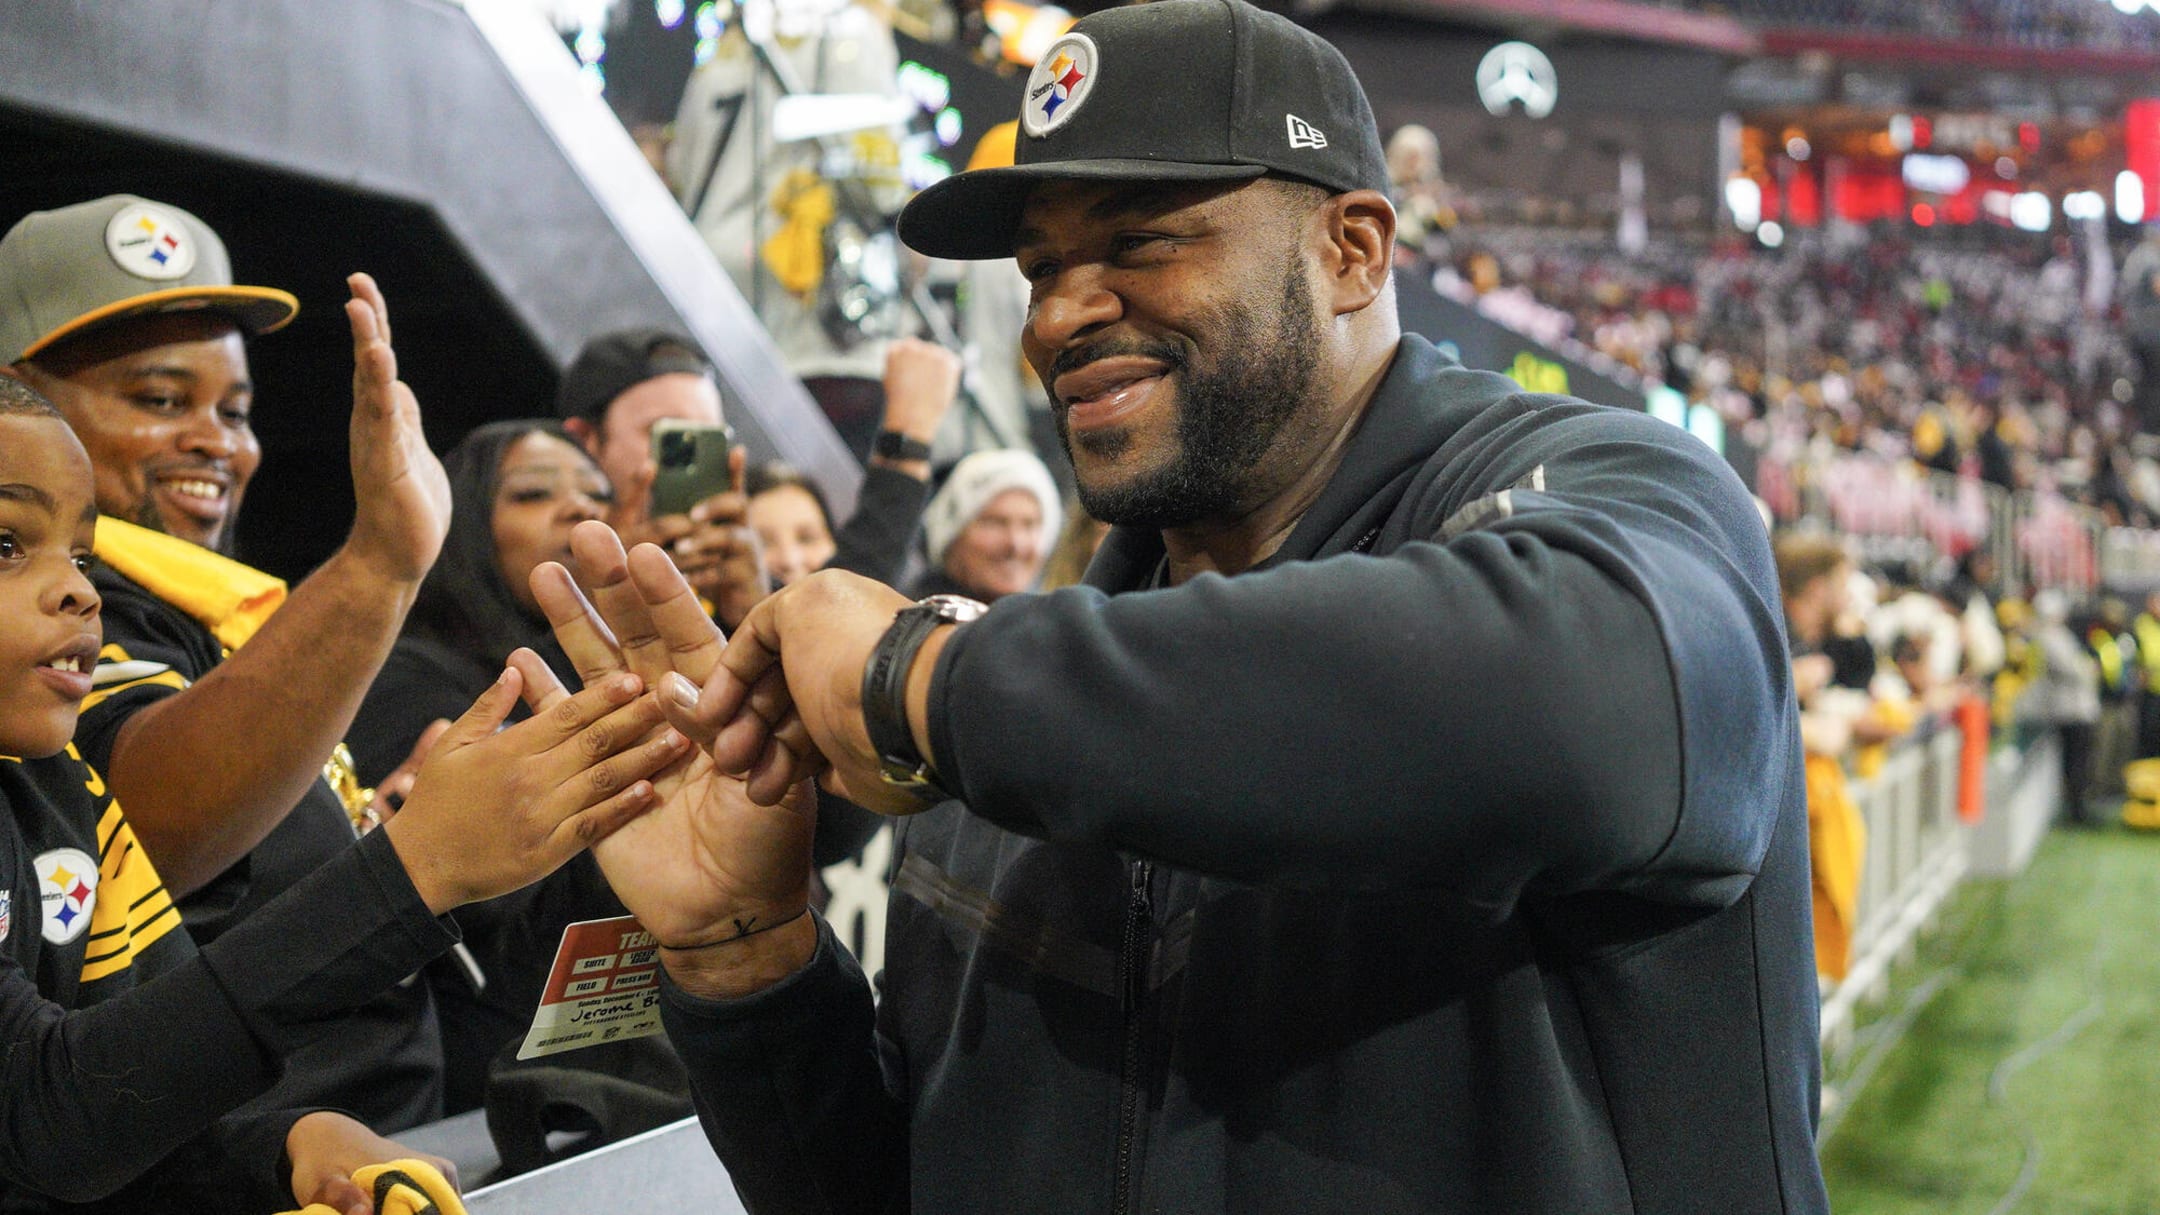 Jerome Bettis on X: Let's get through this Friday